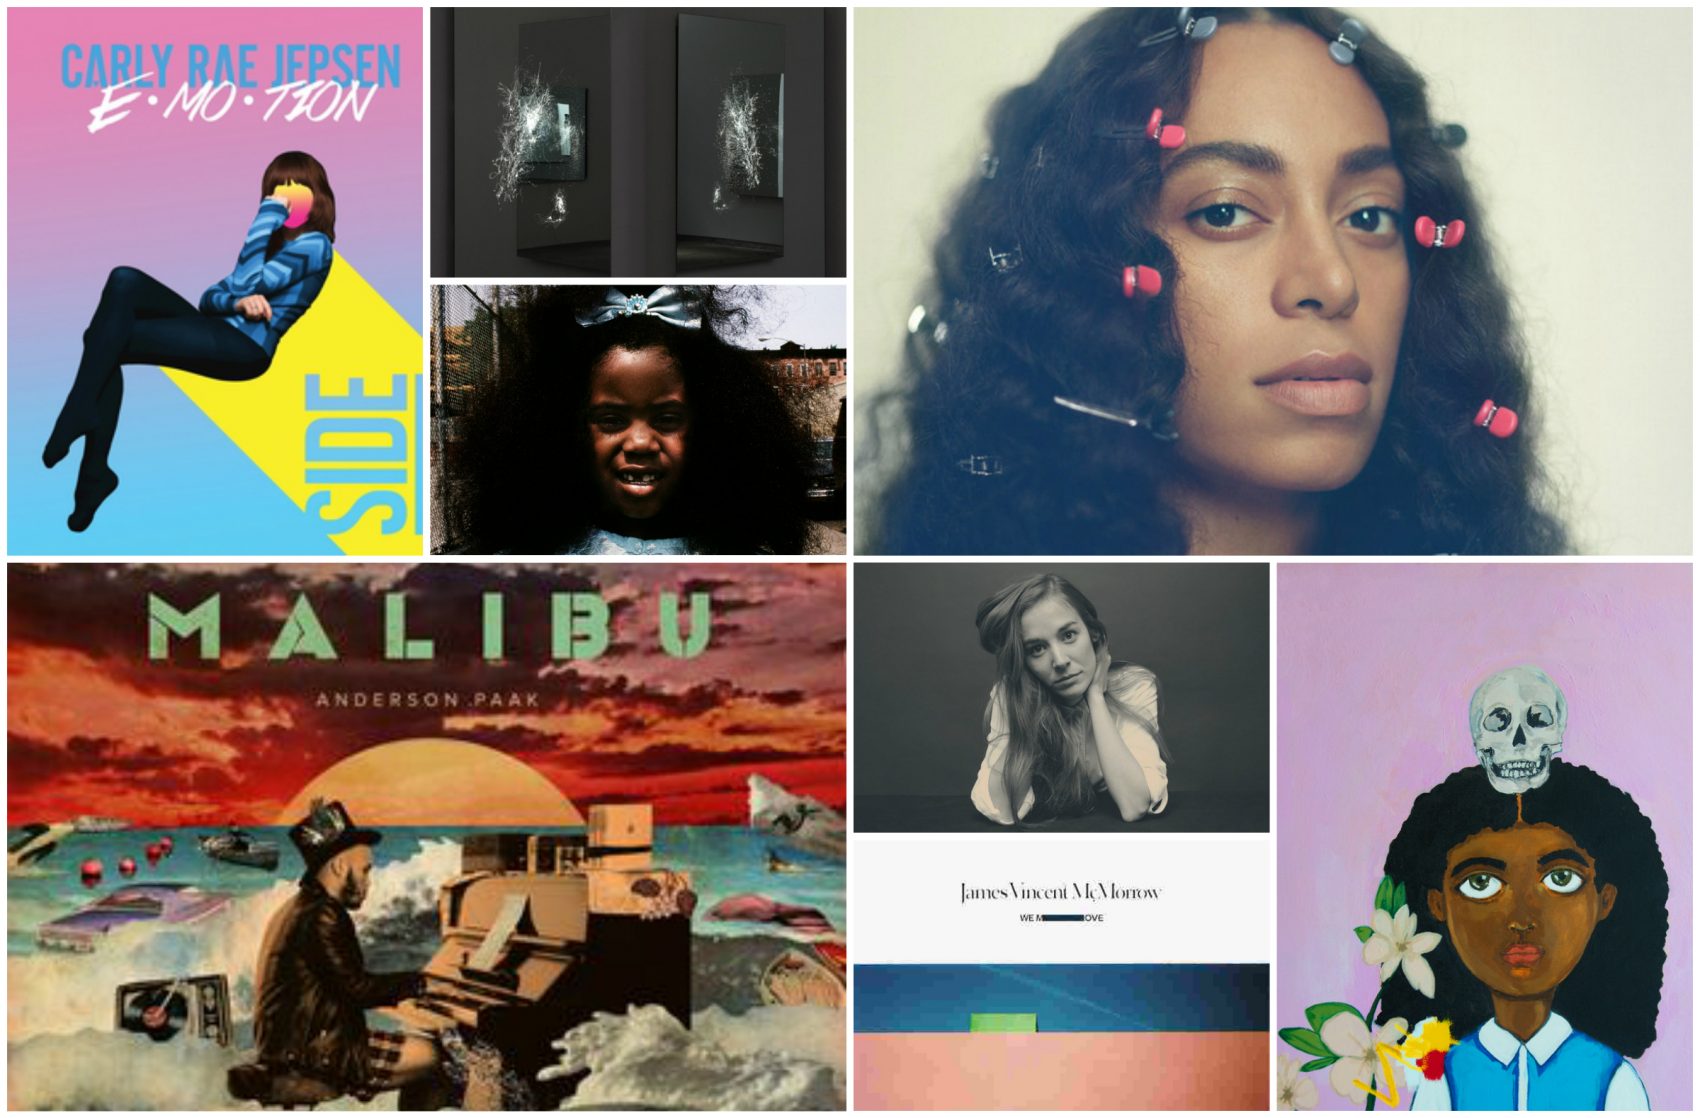 Music critic Amelia Mason runs through the year in music with her favorite albums. (Album art courtesy of the artists)